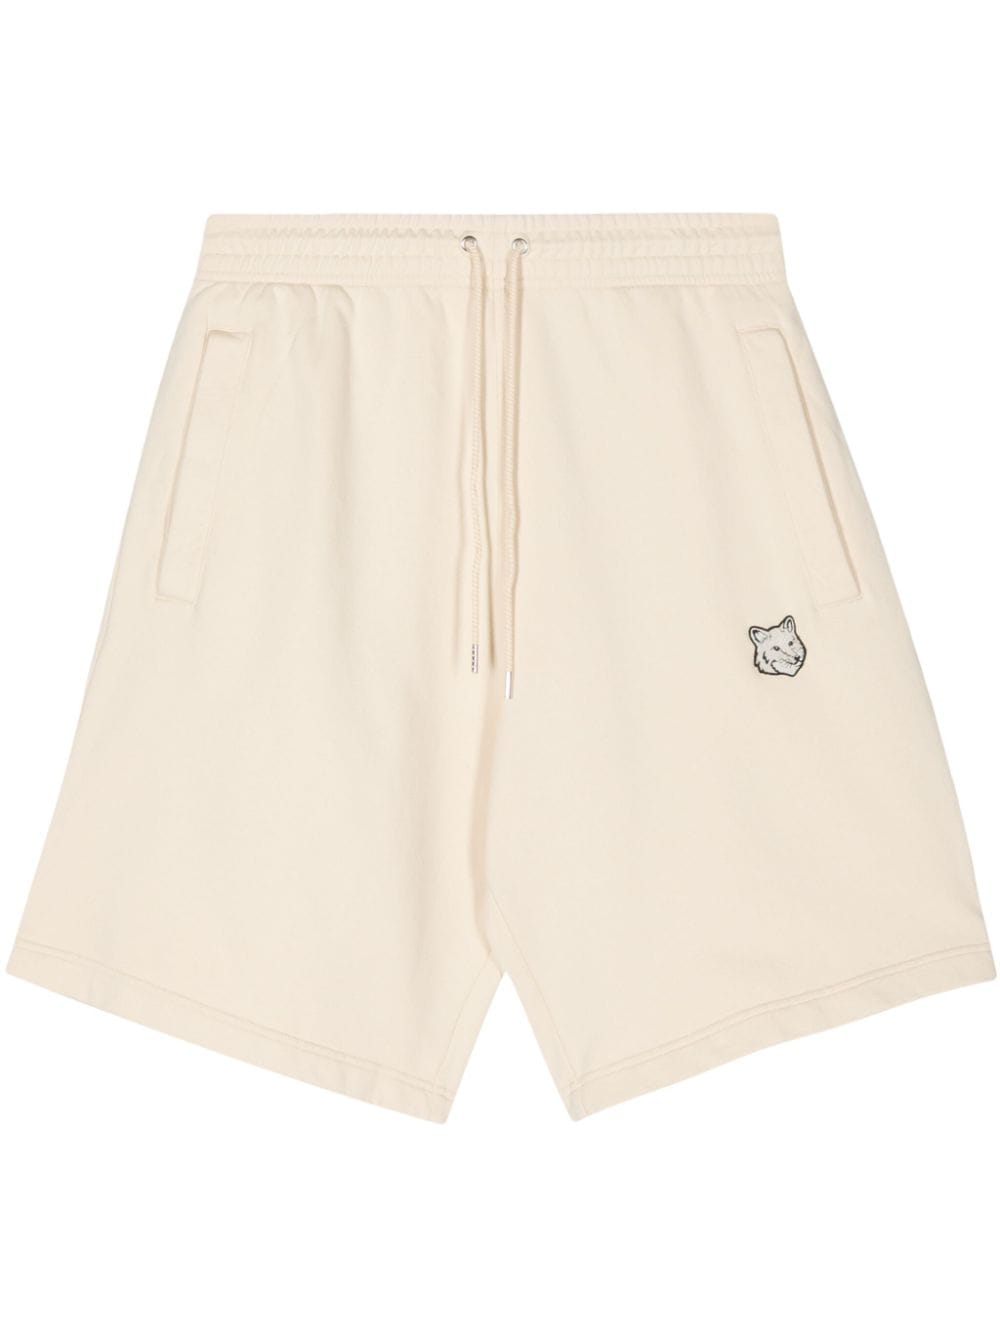 Fox-patch track shorts<BR/><BR/><BR/>